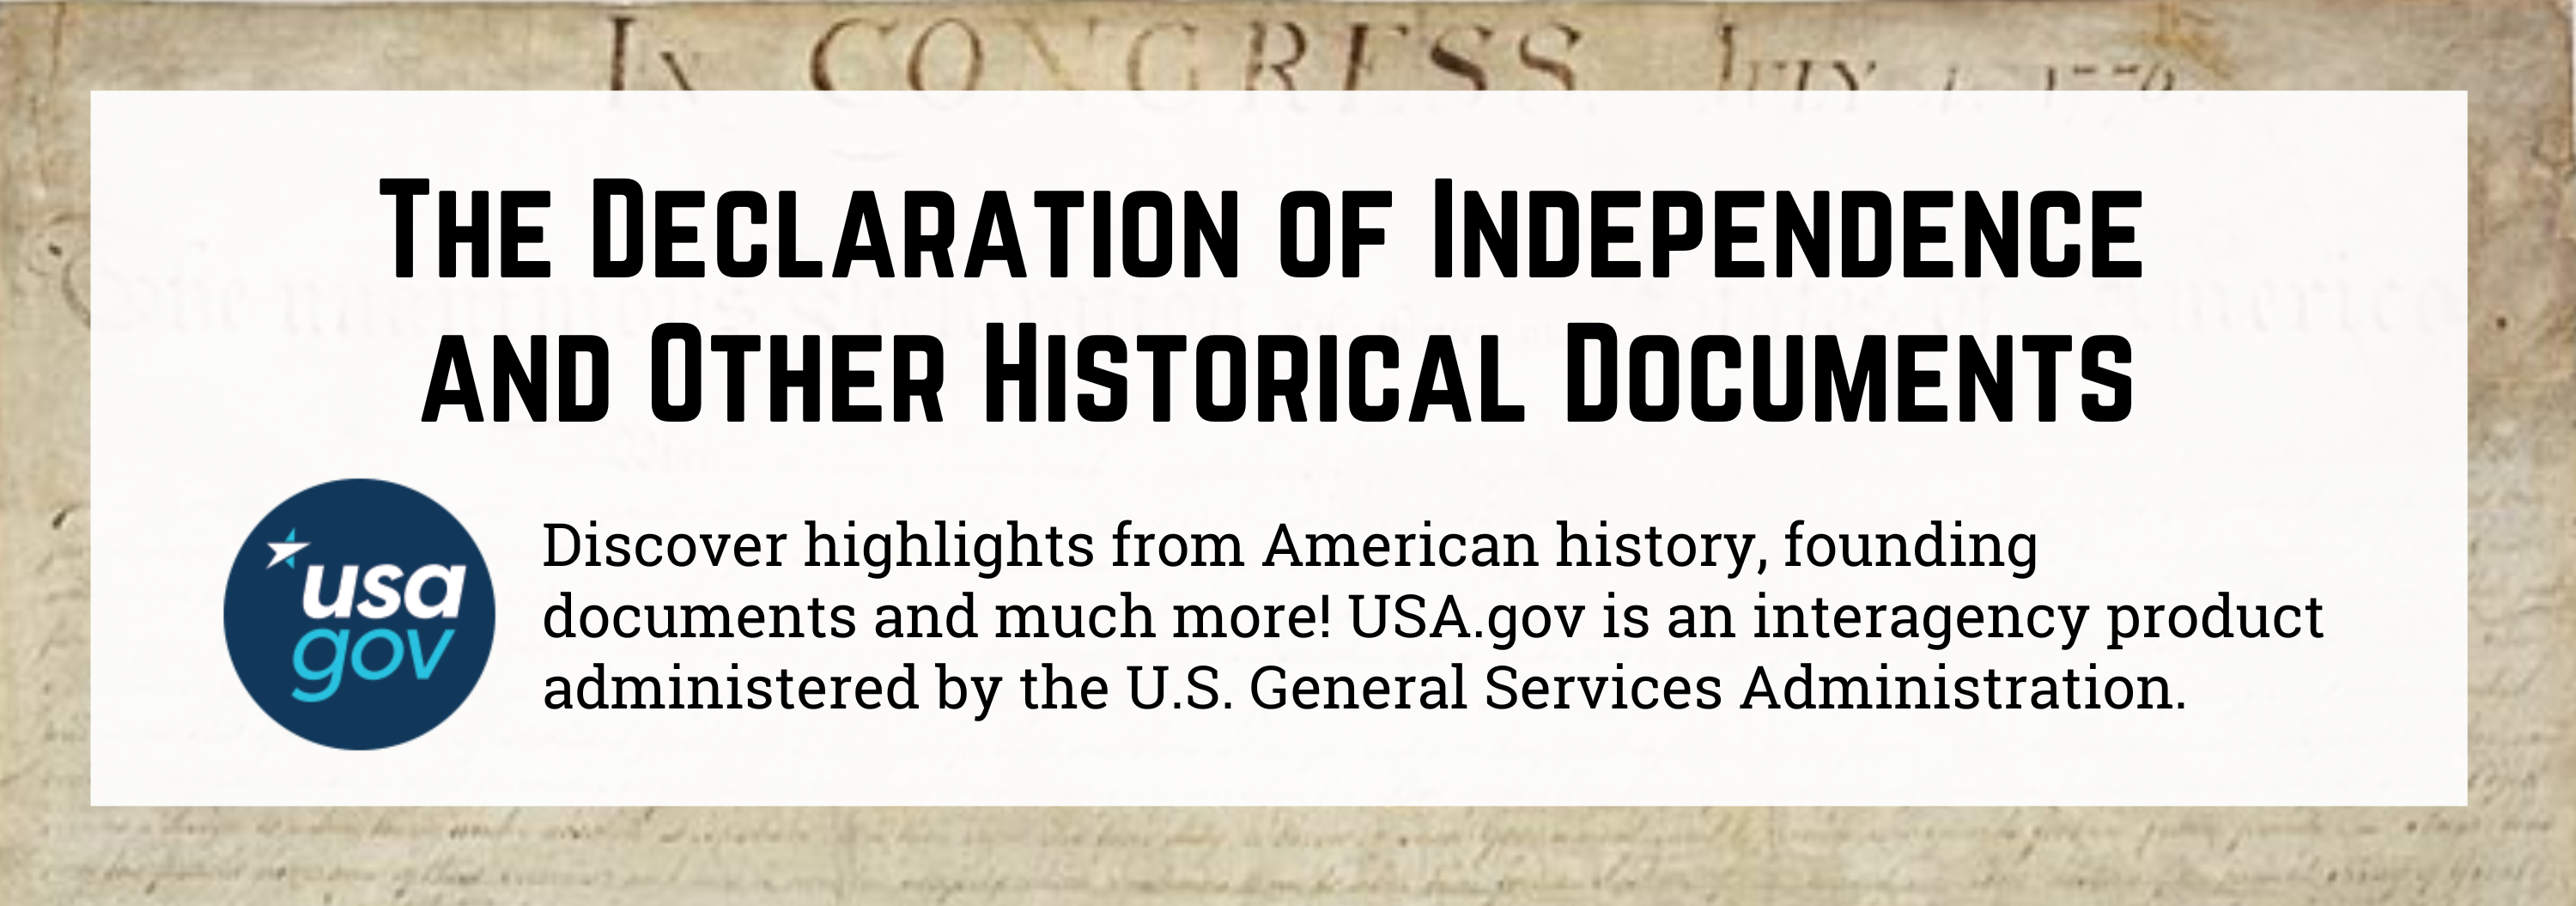 The Declaration of Independence and Other Historical Documents